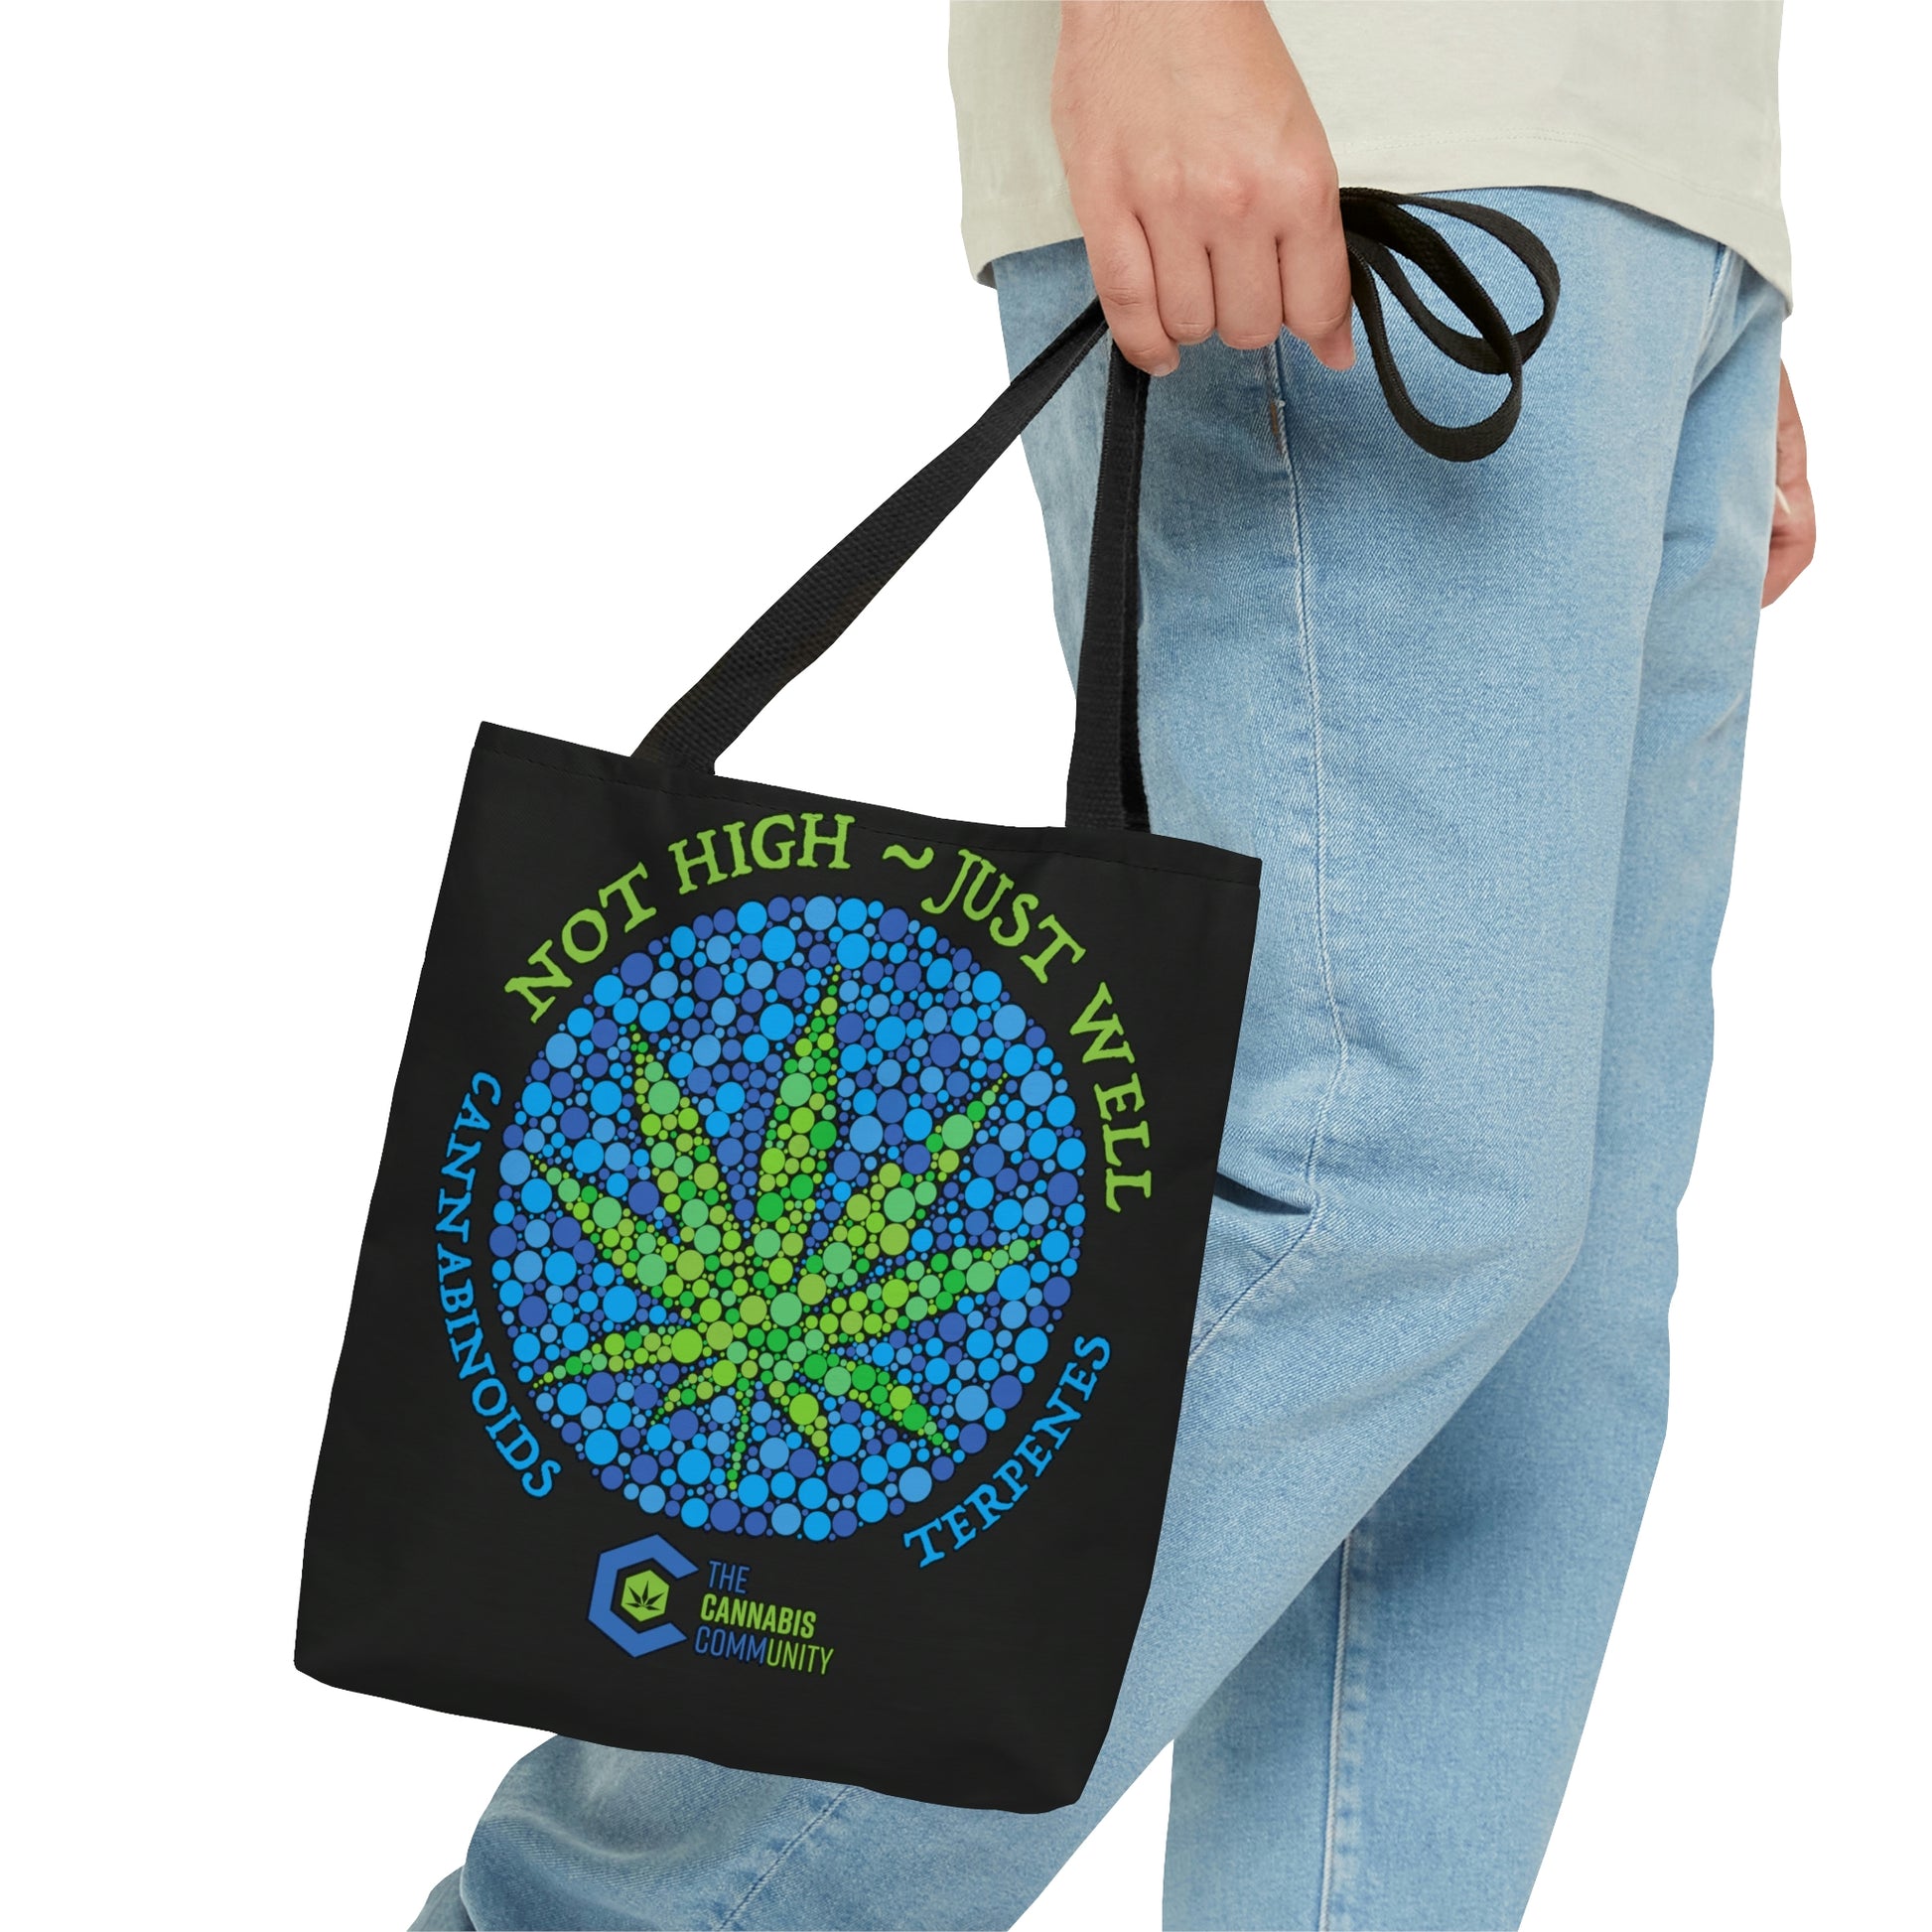 A man is headed towards a destination while he is wearing the Not High, Just Well Medical Cannabis Tote Bag with weed leaf in center